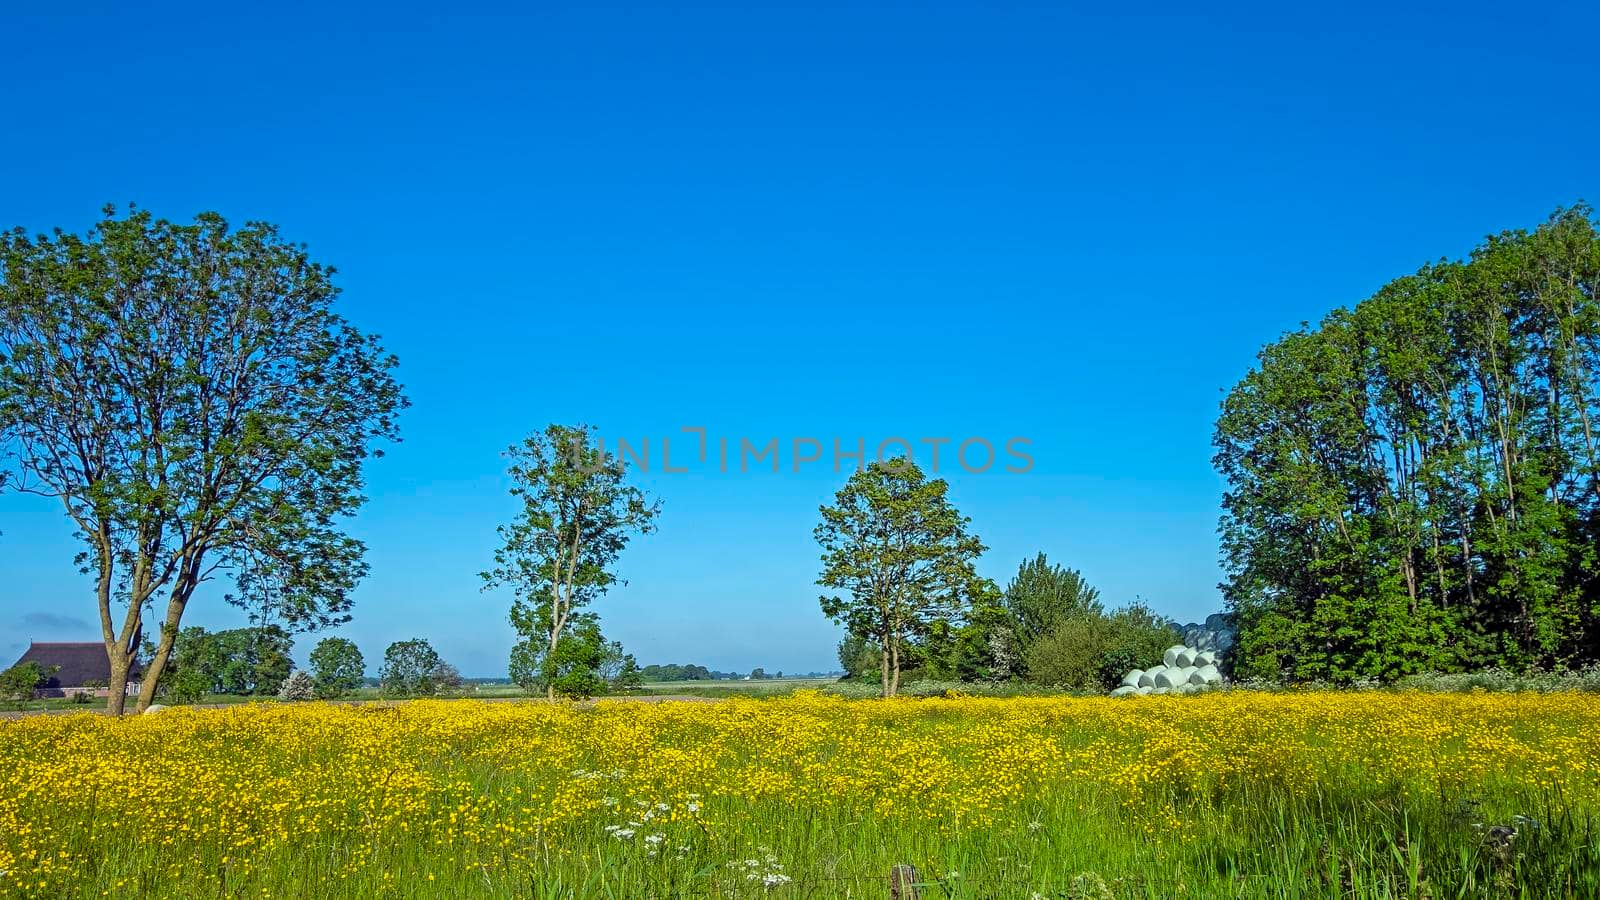 Springtime in the countryside from the Netherlands by devy